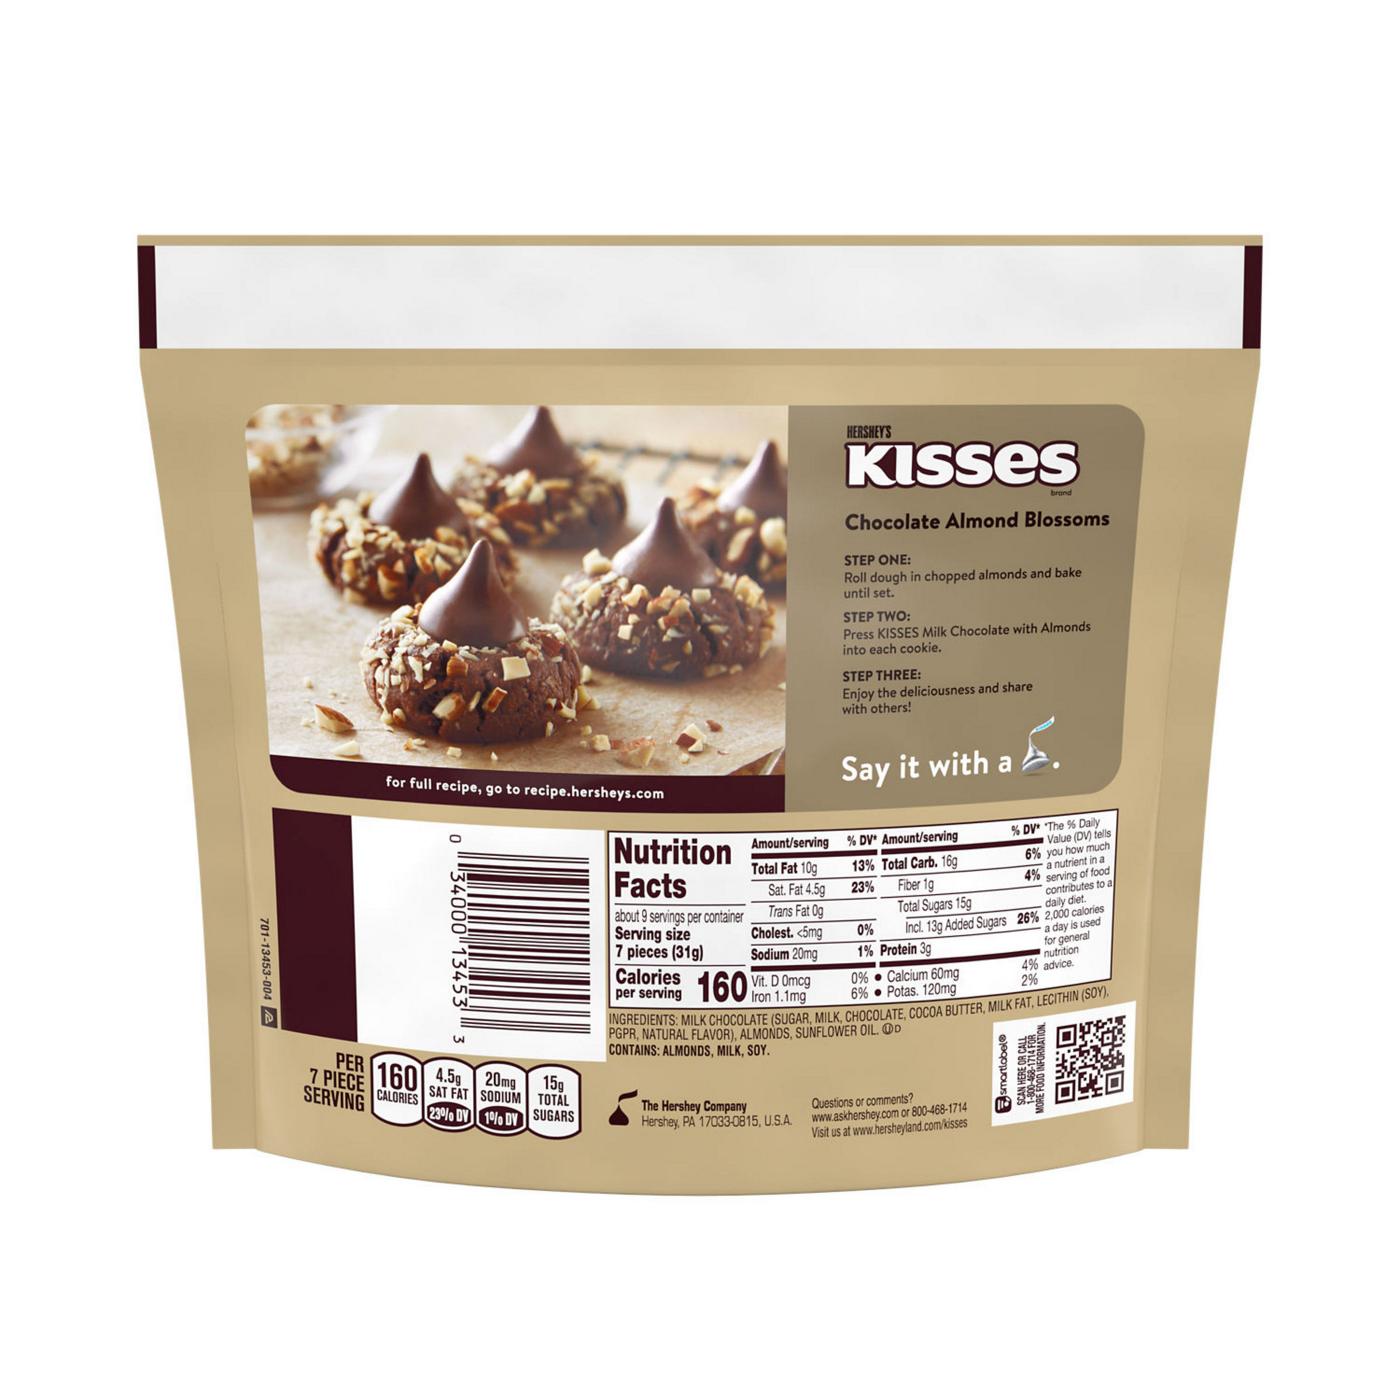 Hershey's Kisses Milk Chocolate with Almonds Candy - Share Pack; image 7 of 7